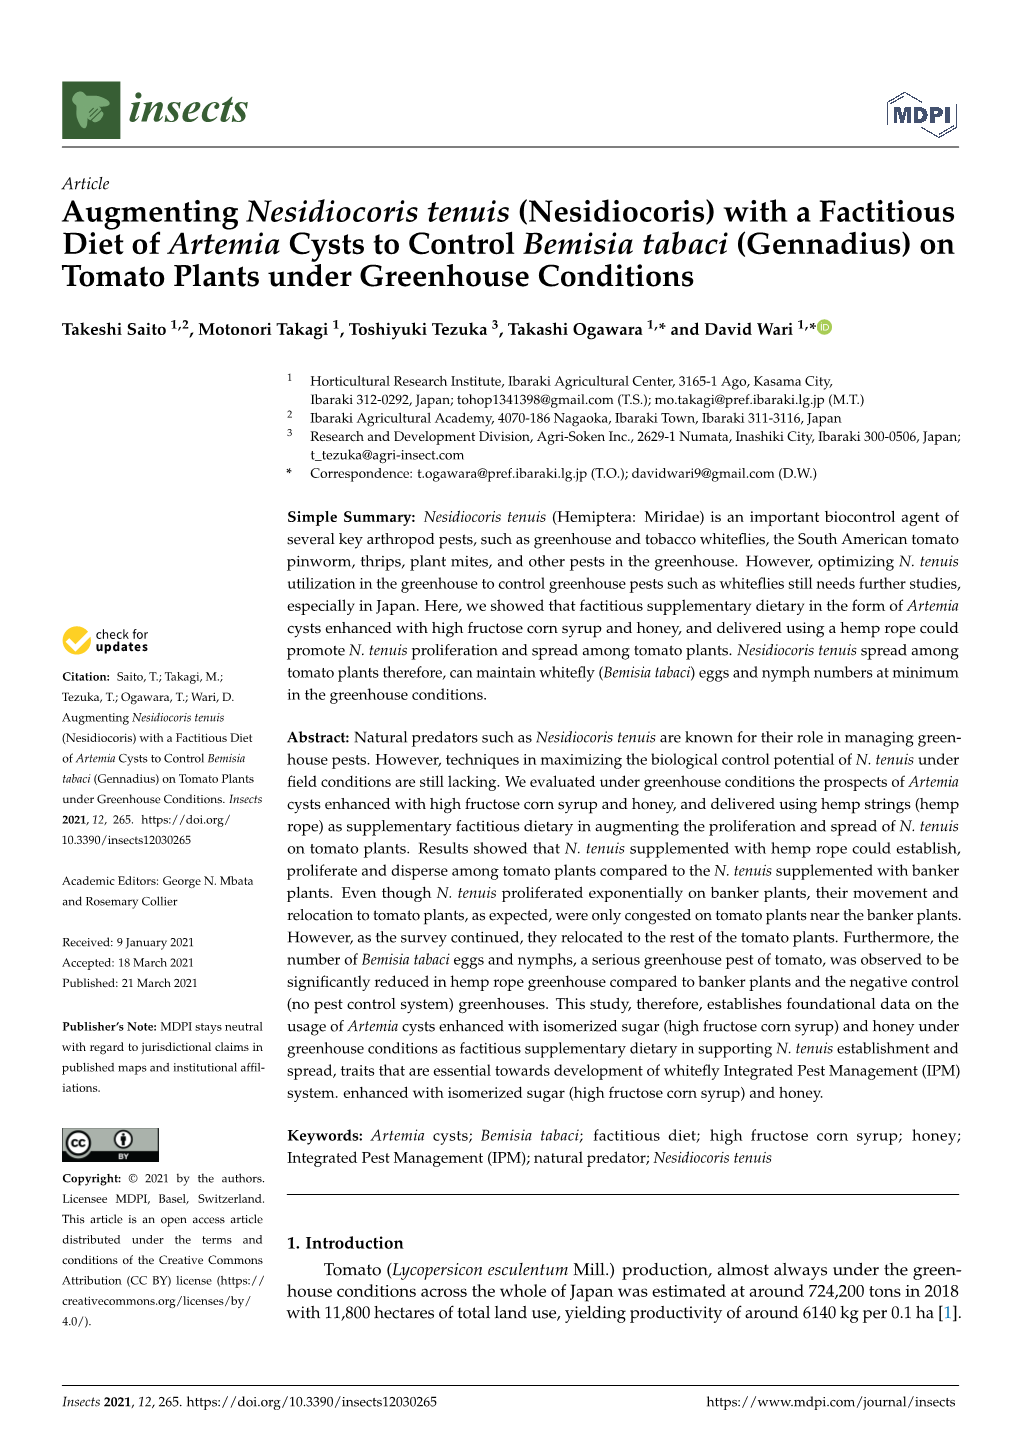 With a Factitious Diet of Artemia Cysts to Control Bemisia Tabaci (Gennadius) on Tomato Plants Under Greenhouse Conditions